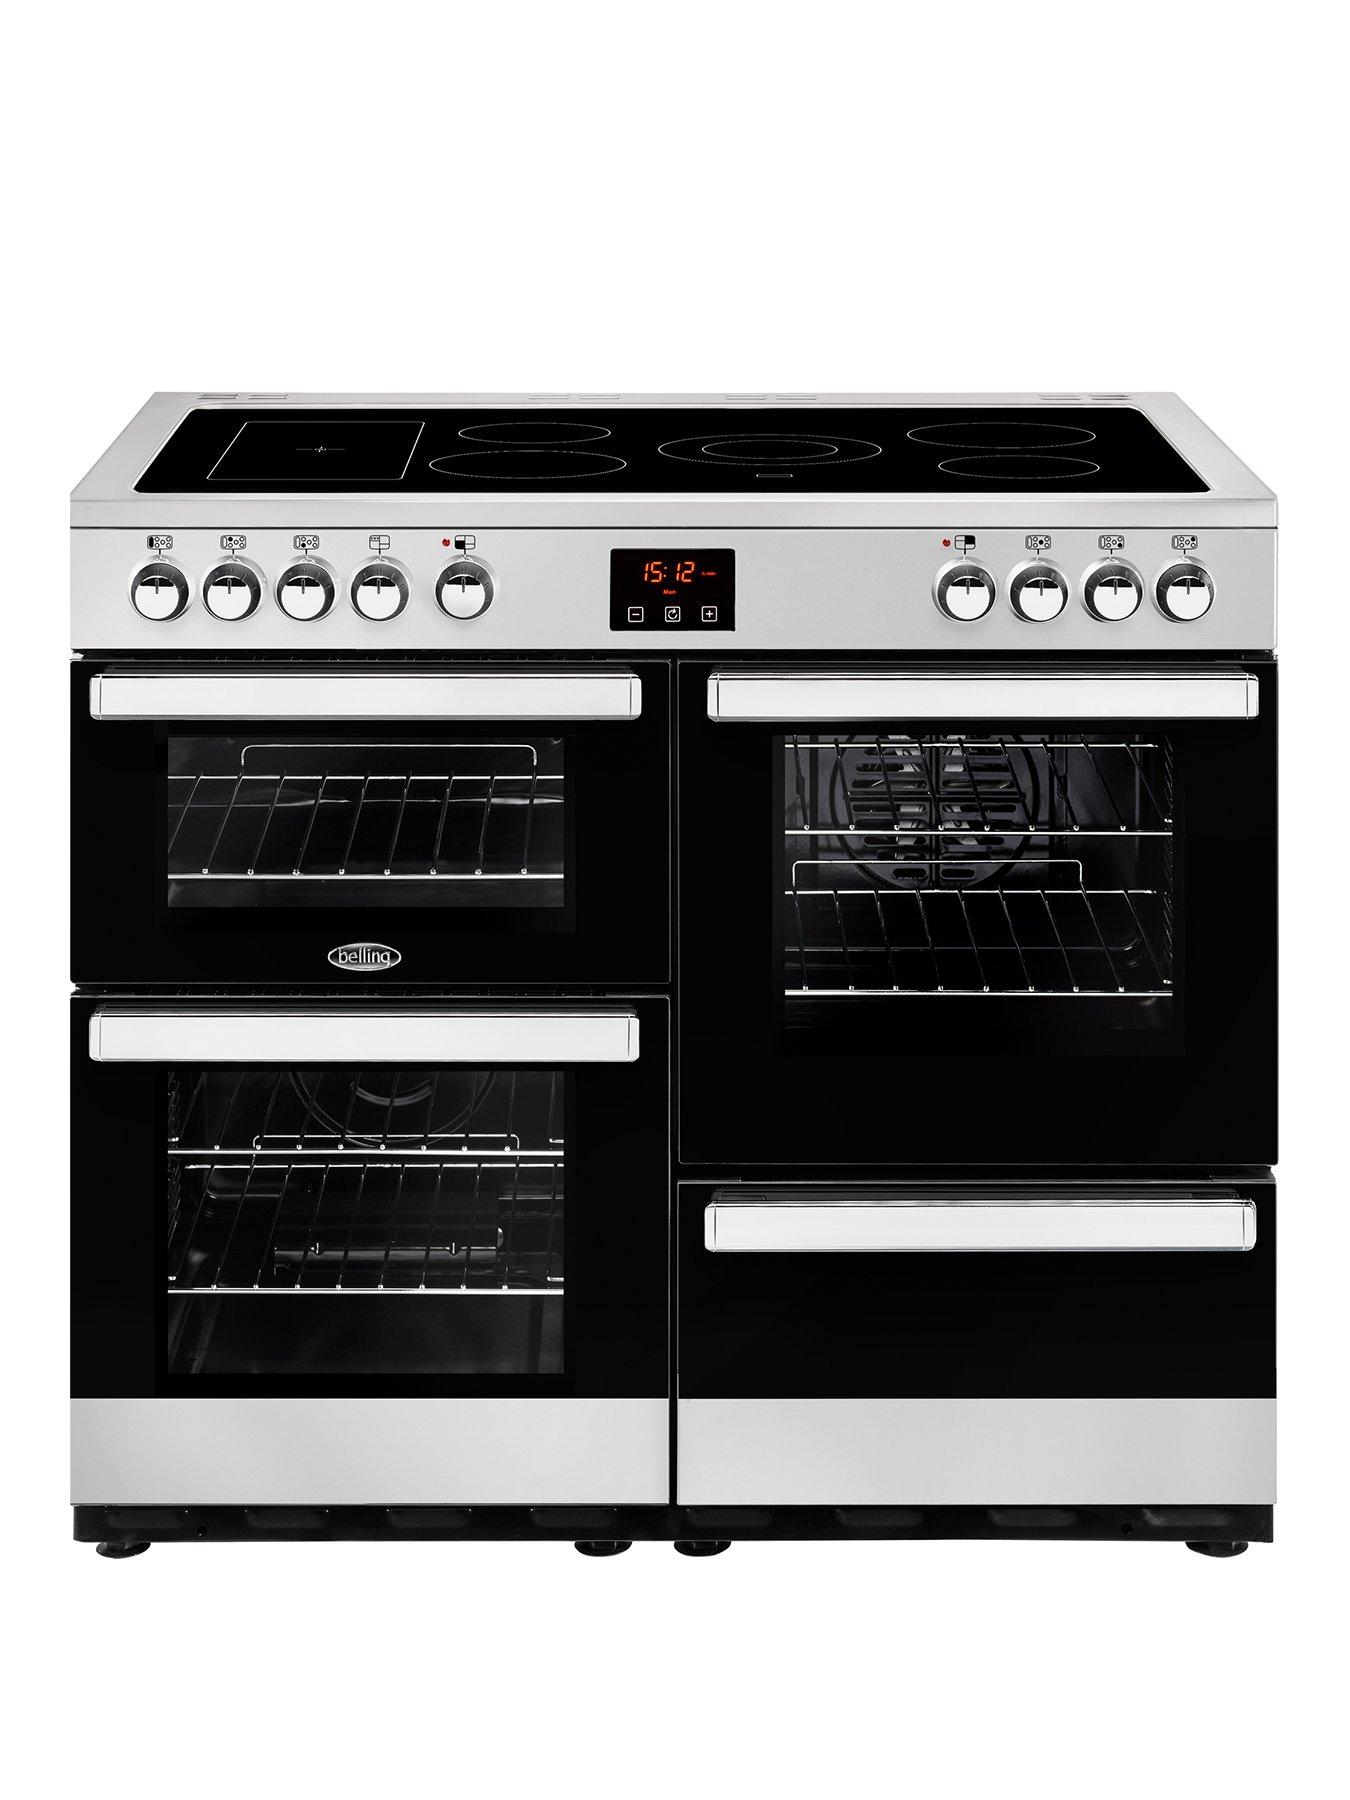 Belling 100E Belling Cookcentre 100Cm Electric Range Cooker Stainless Steel – Rangecooker Only